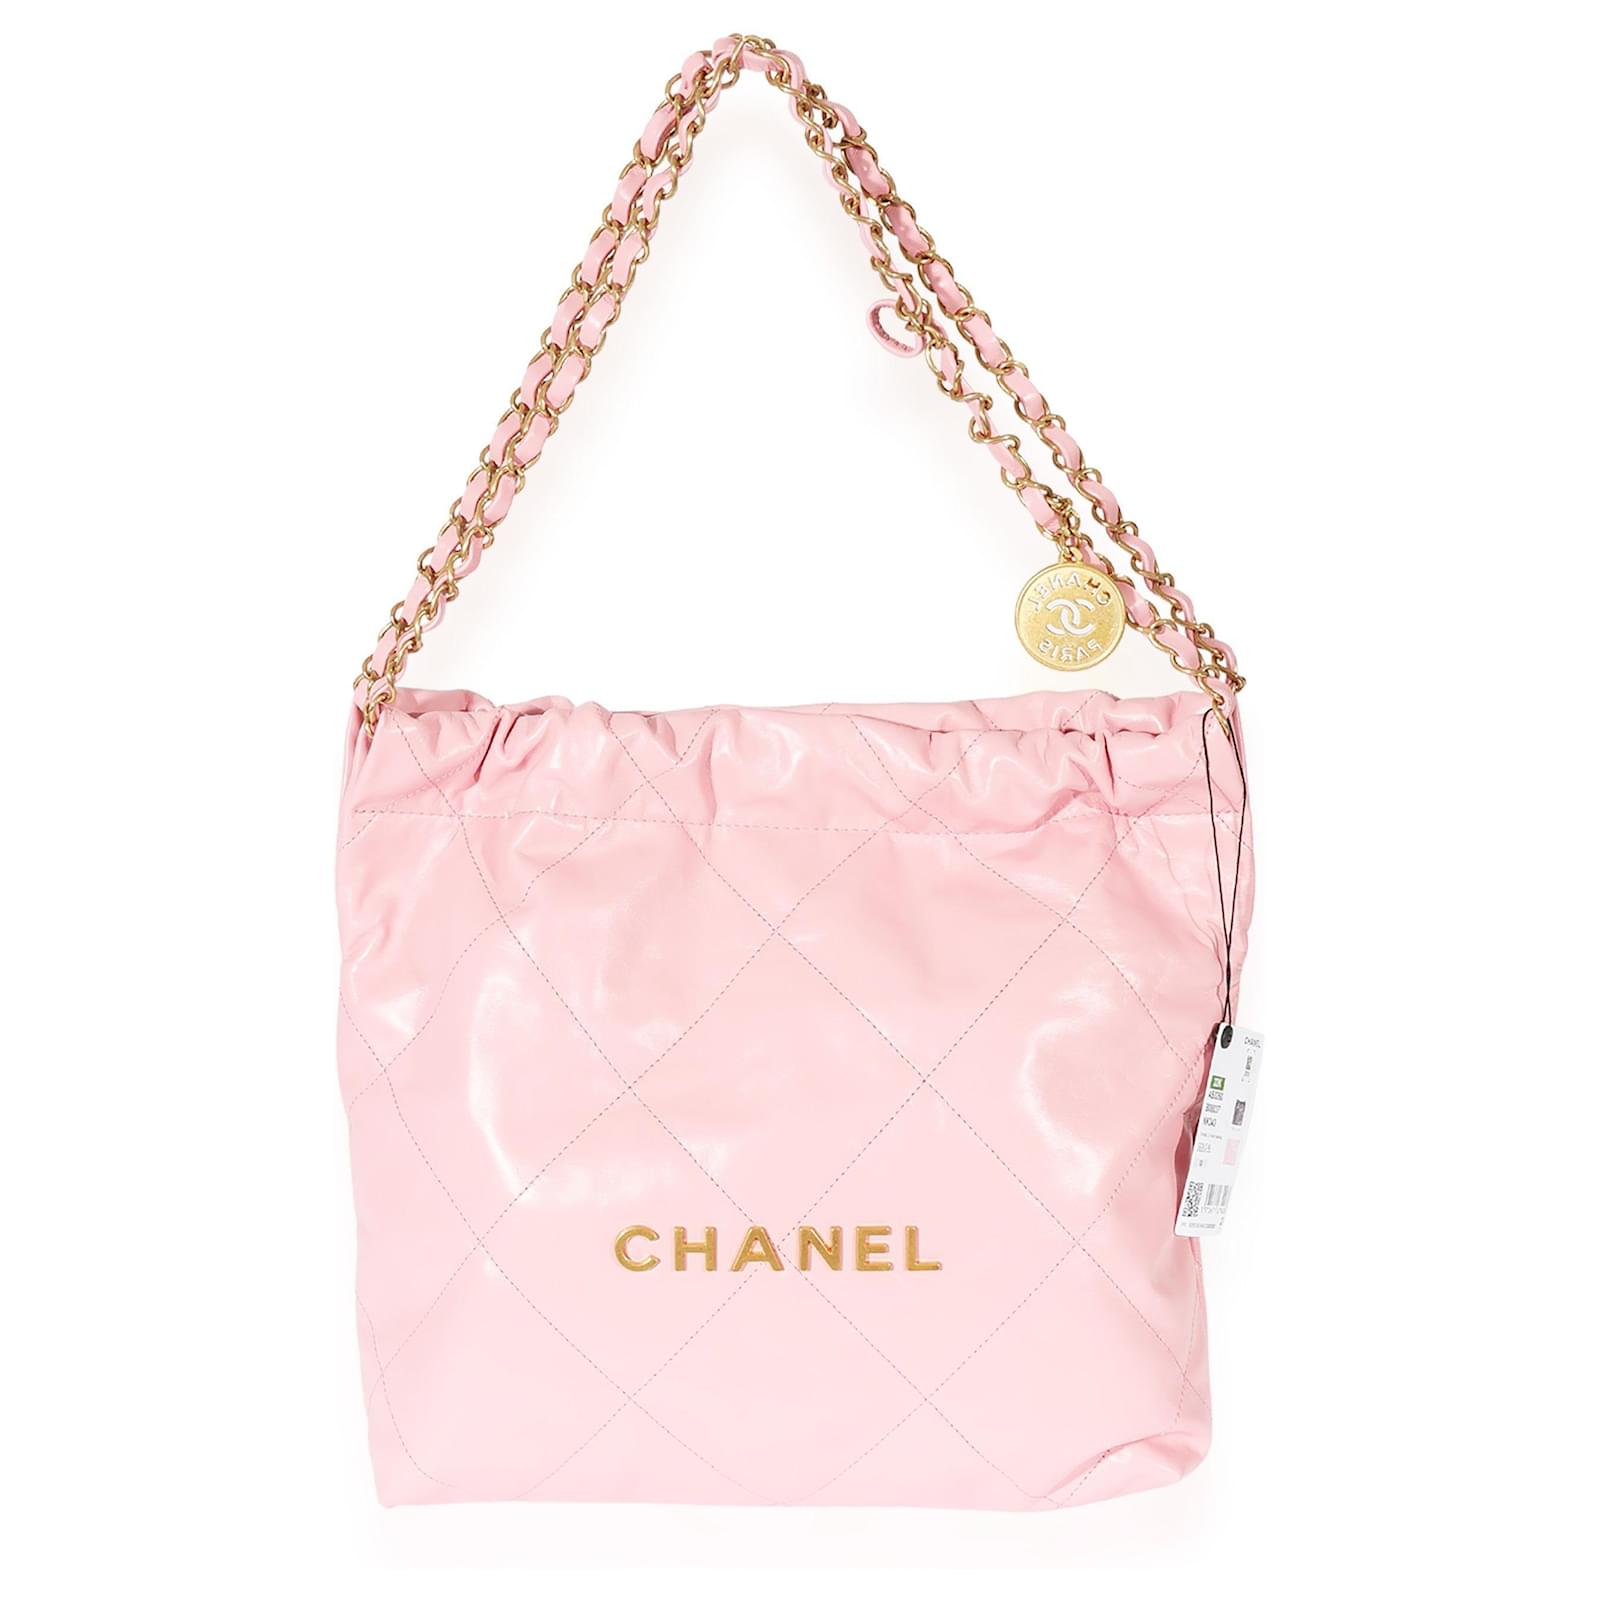 Chanel Pink Calfskin Small 22 Bag Leather Pony-style calfskin ref